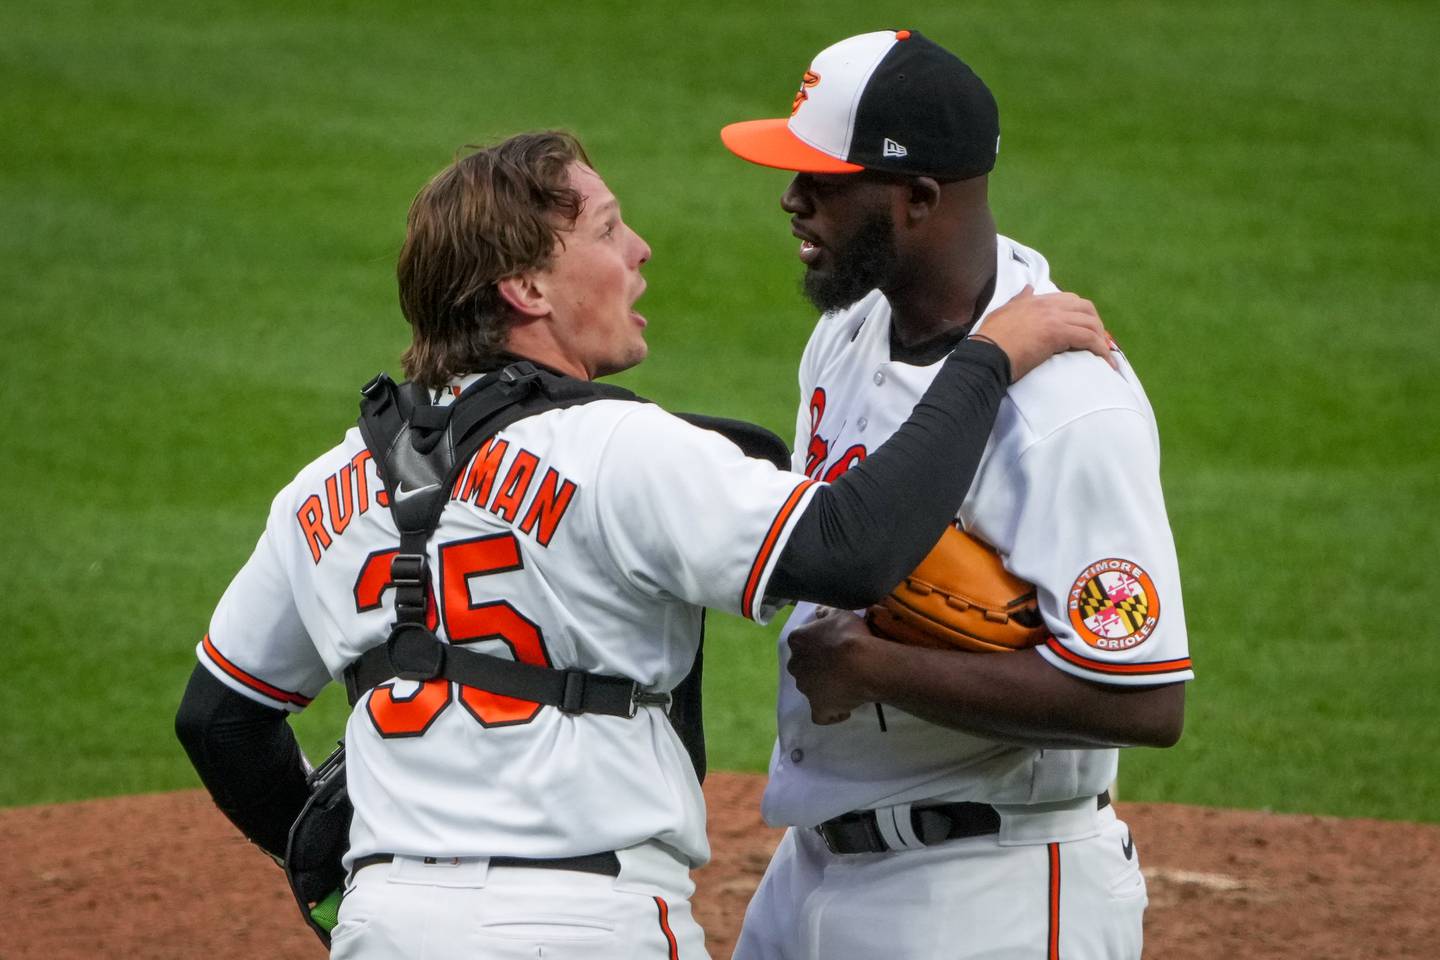 Baltimore Orioles catcher Adley Rutschman (35) celebrates with relief pitcher Felix Bautista (74) at the end of a baseball game against the New York Yankees on Friday, April 7. The Orioles hosted the Yankees for their Home Opener at Camden Yards.